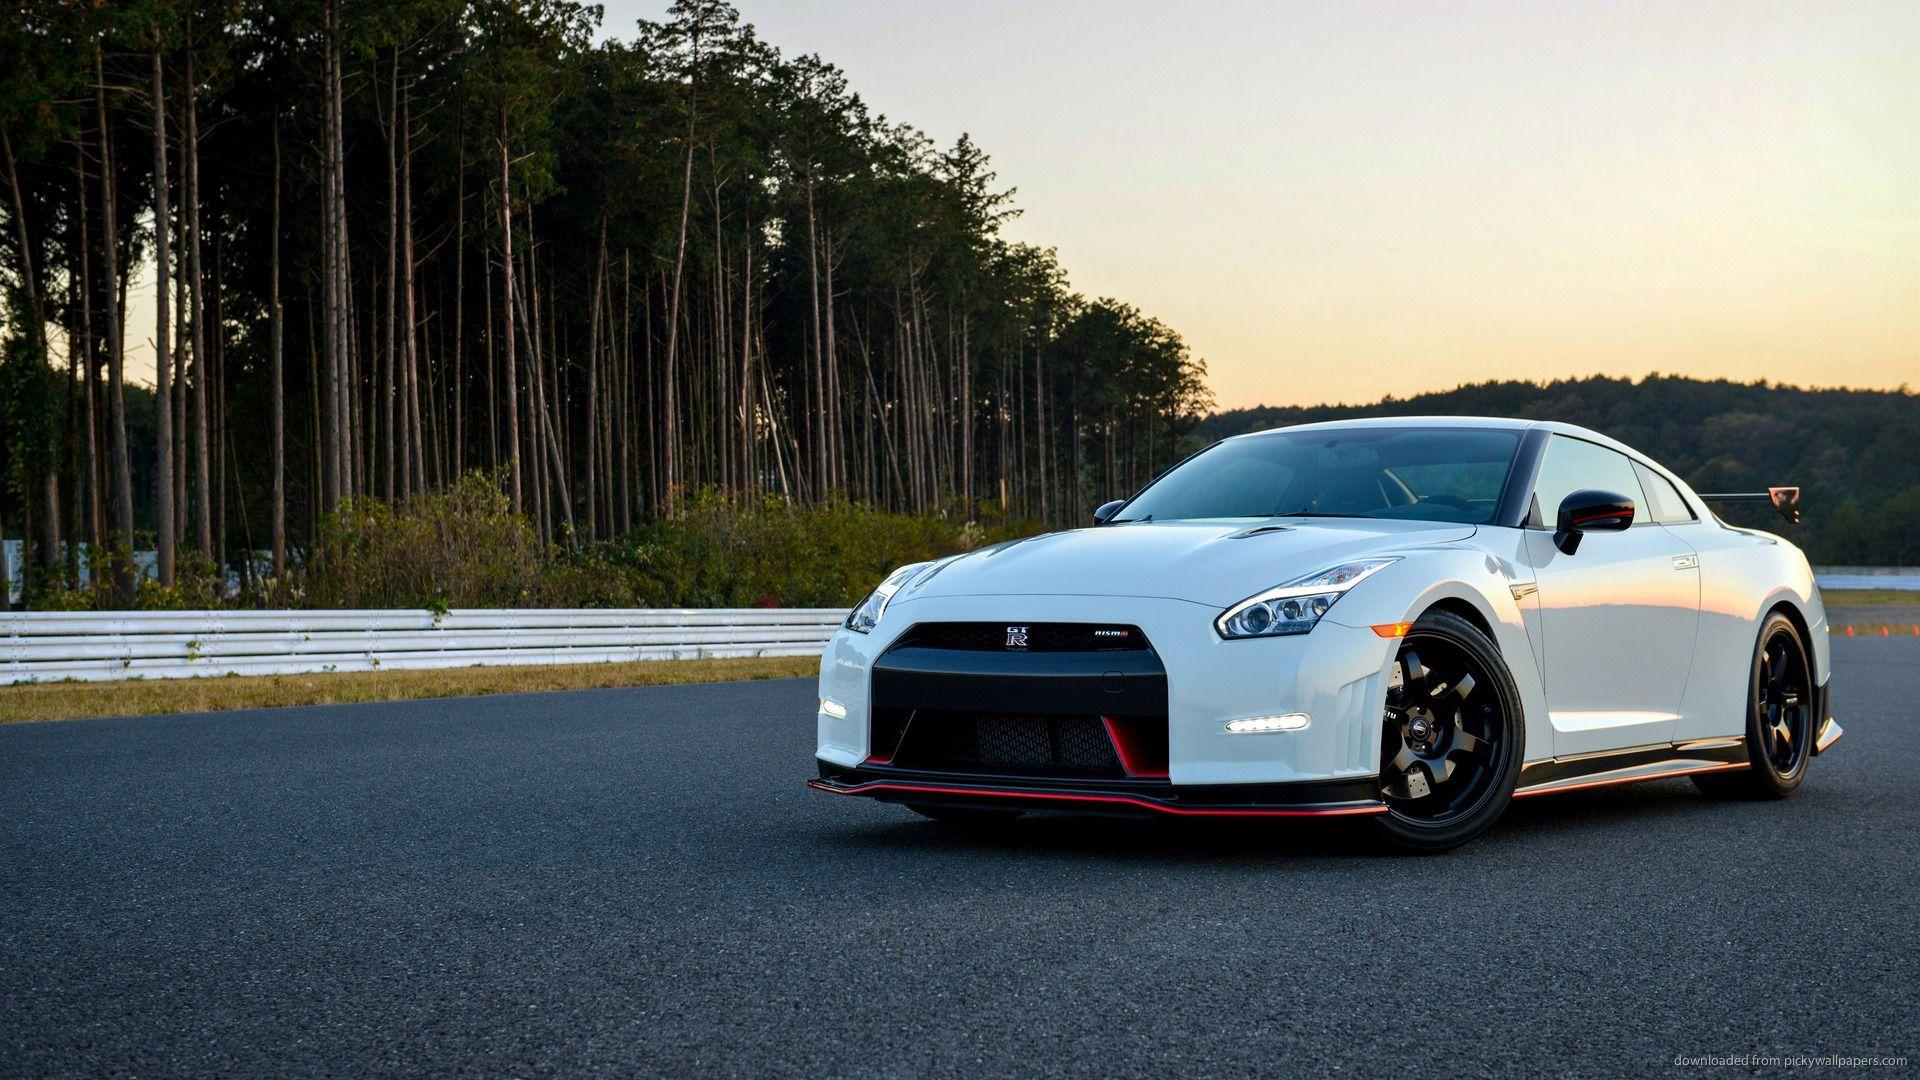 White Gtr Wallpapers Top Free White Gtr Backgrounds Wallpaperaccess